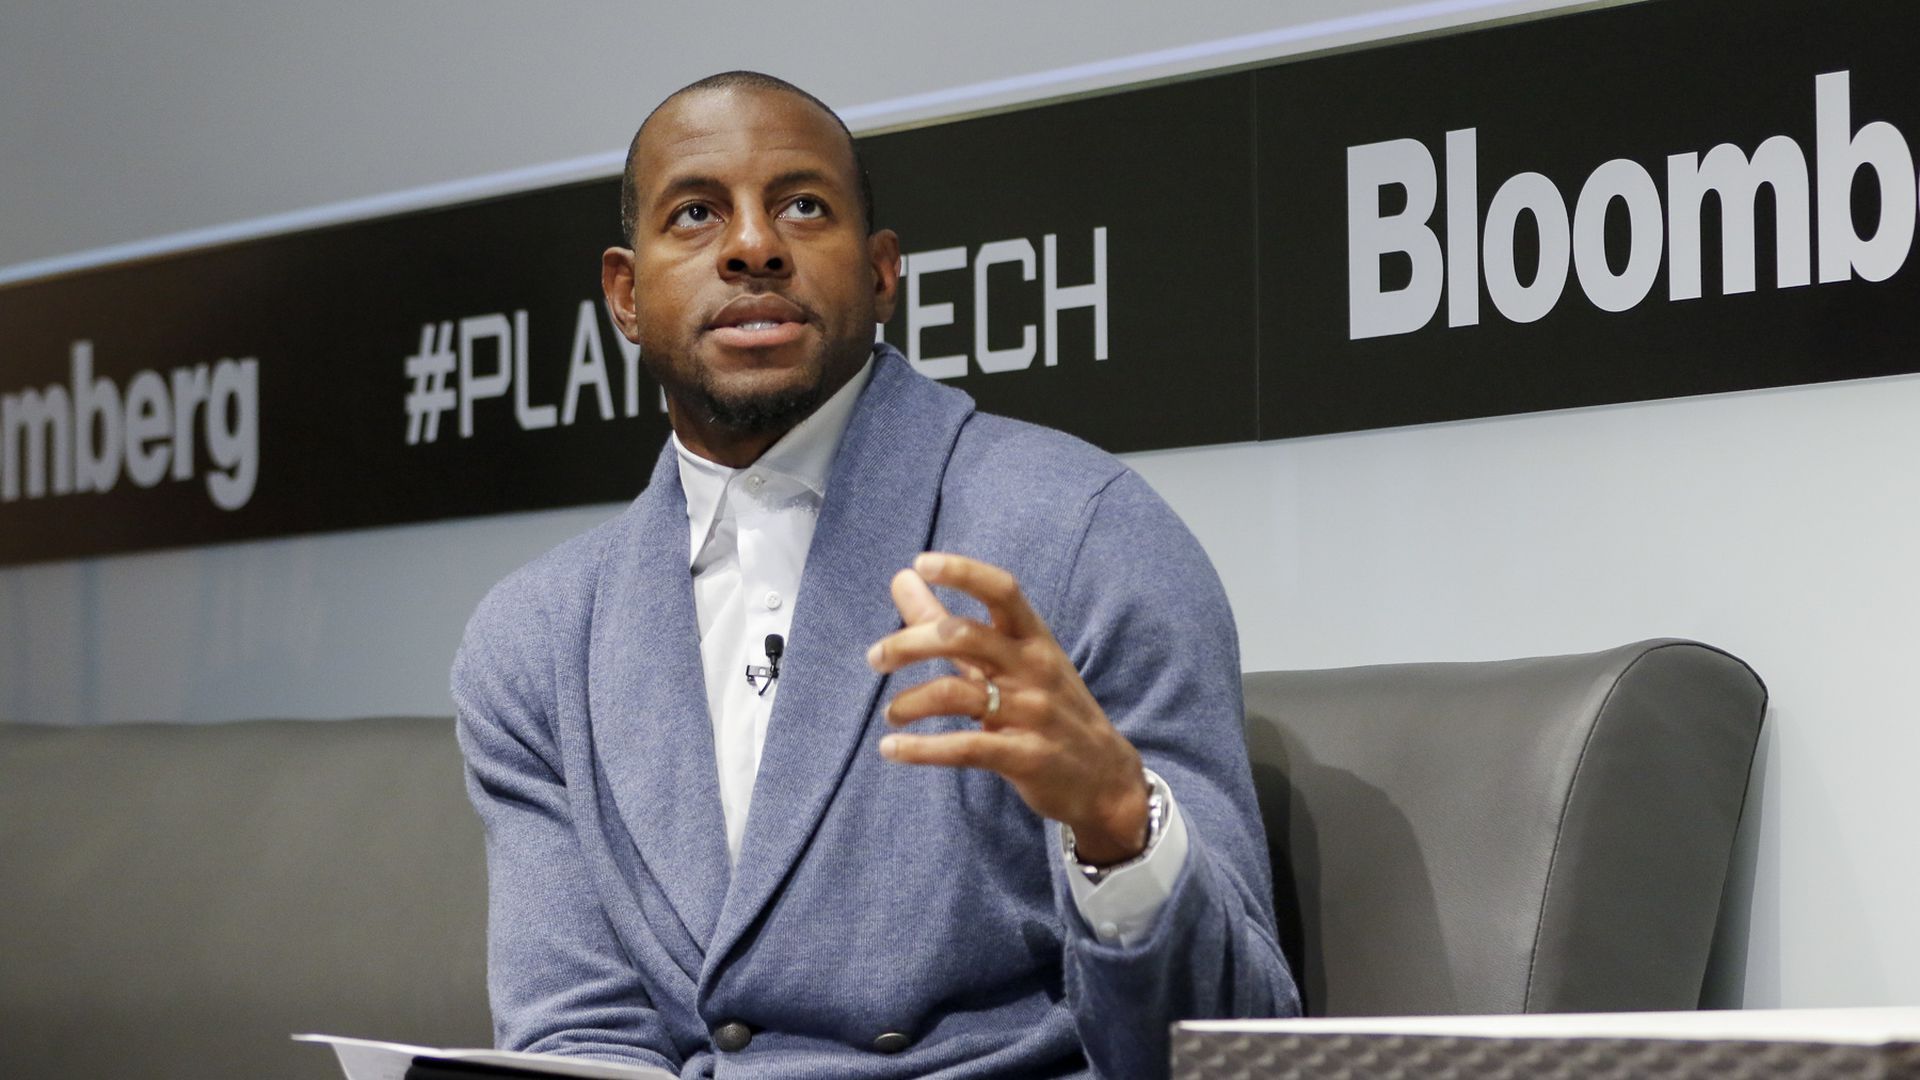 Andre Iguodala speaking at a conference